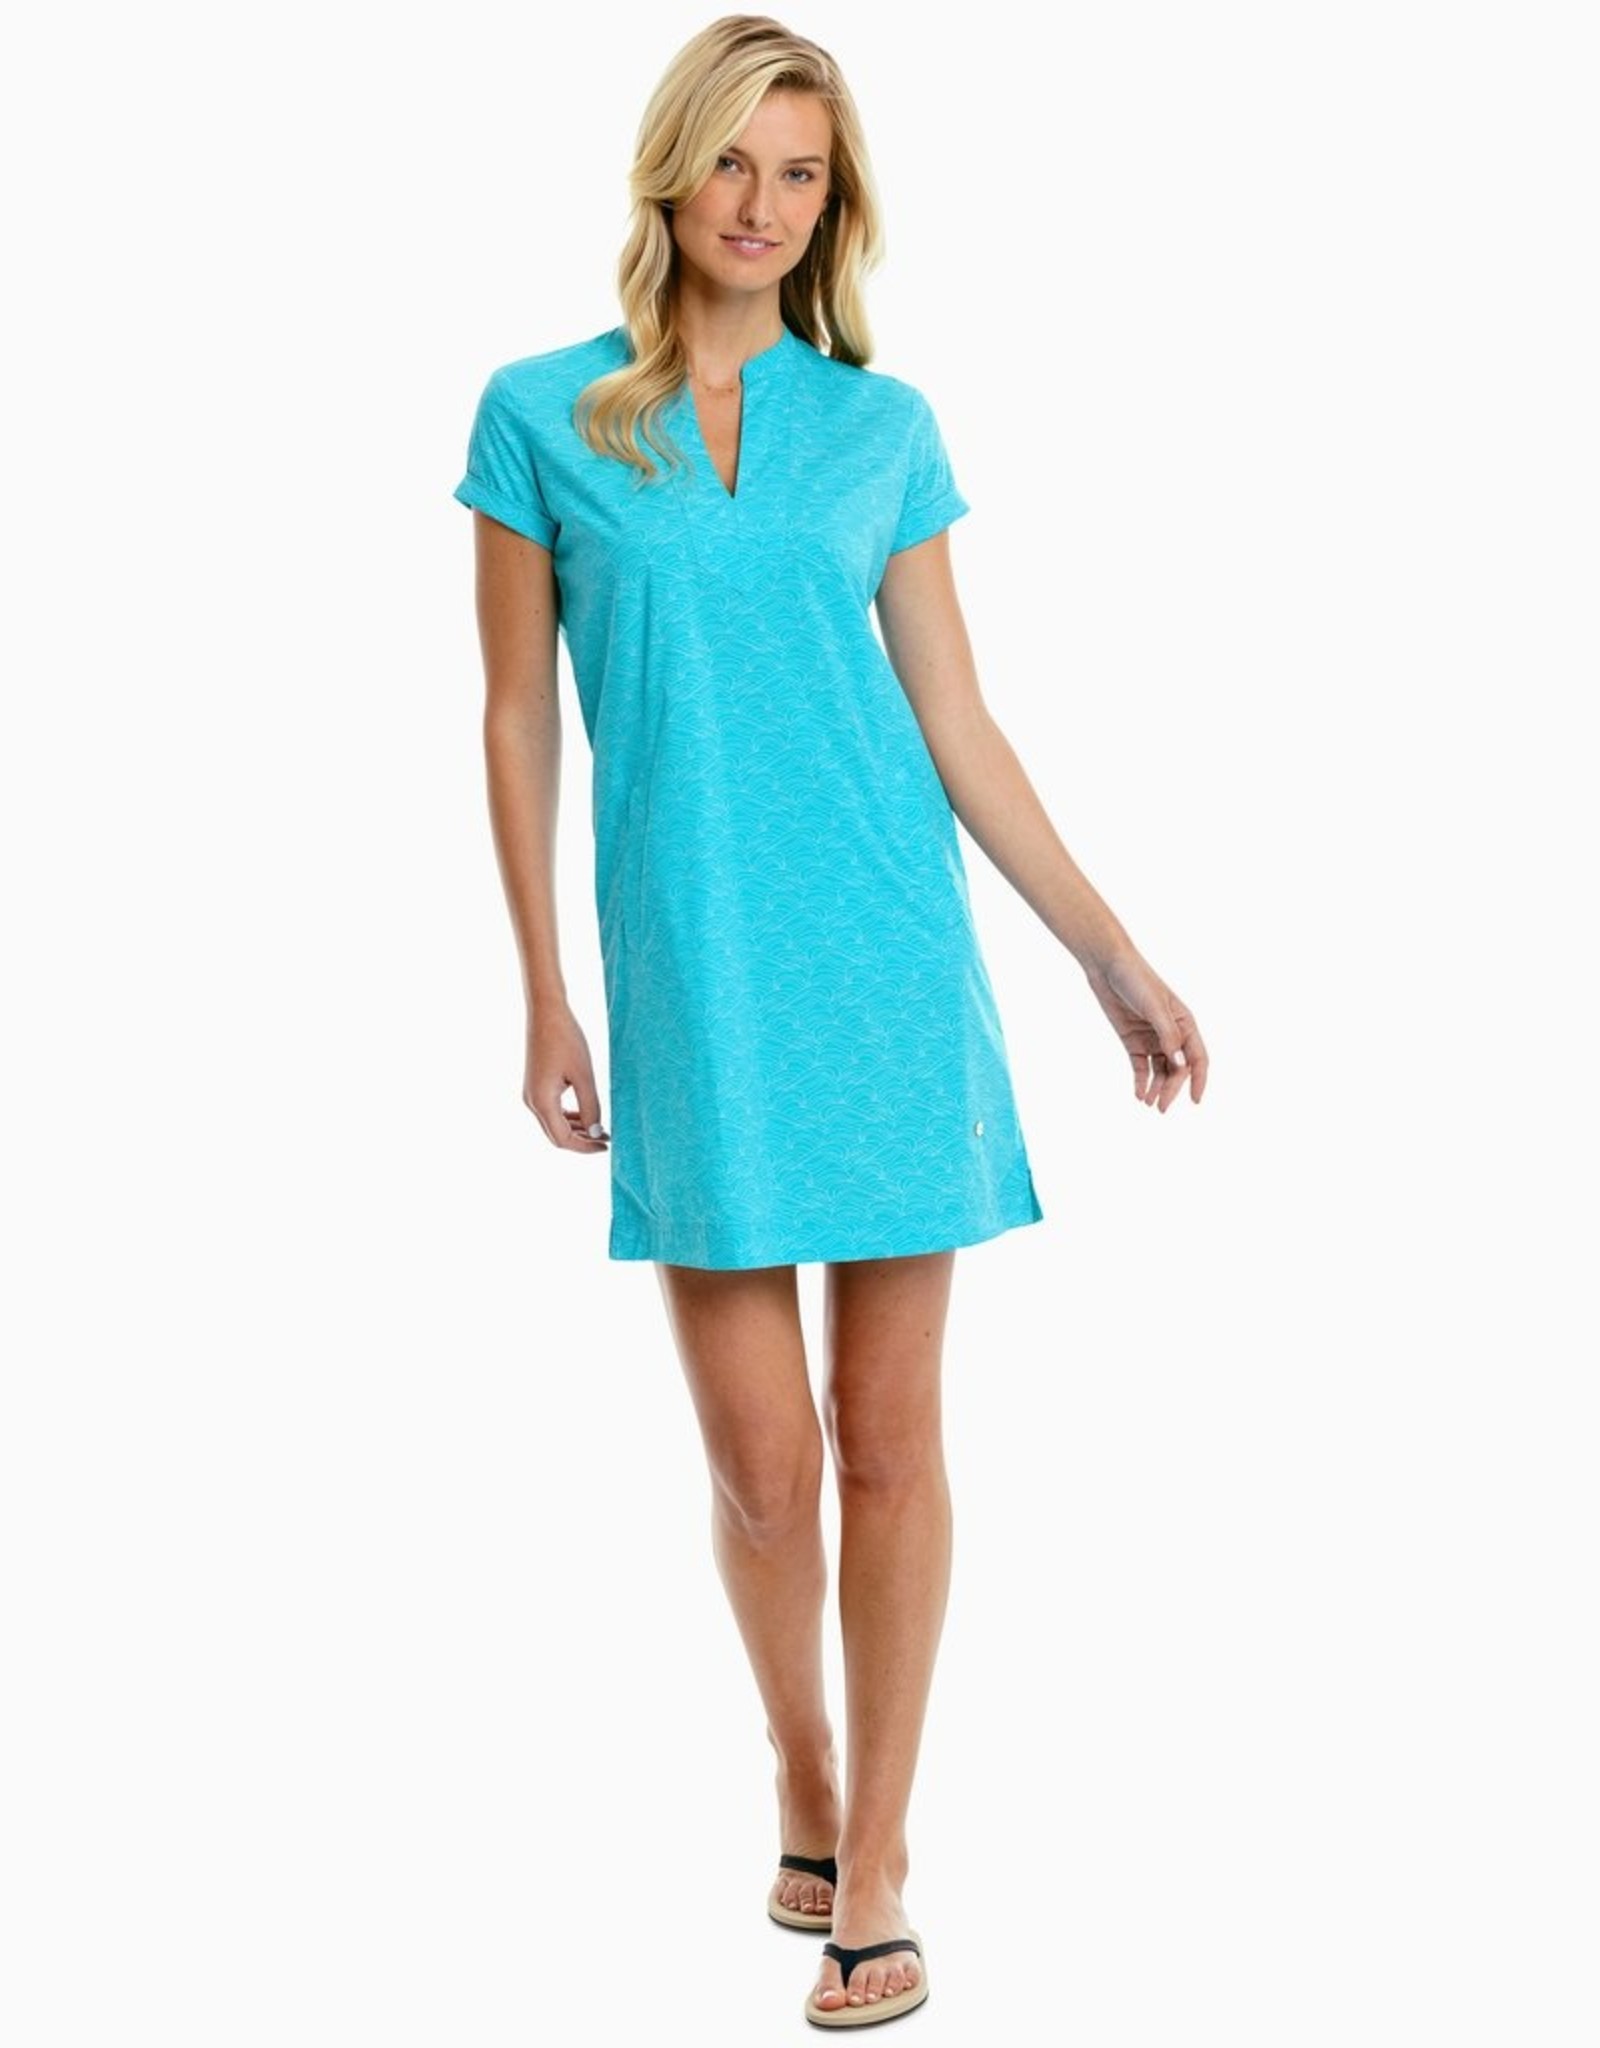 Southern Tide Baily Brrr IC Dress